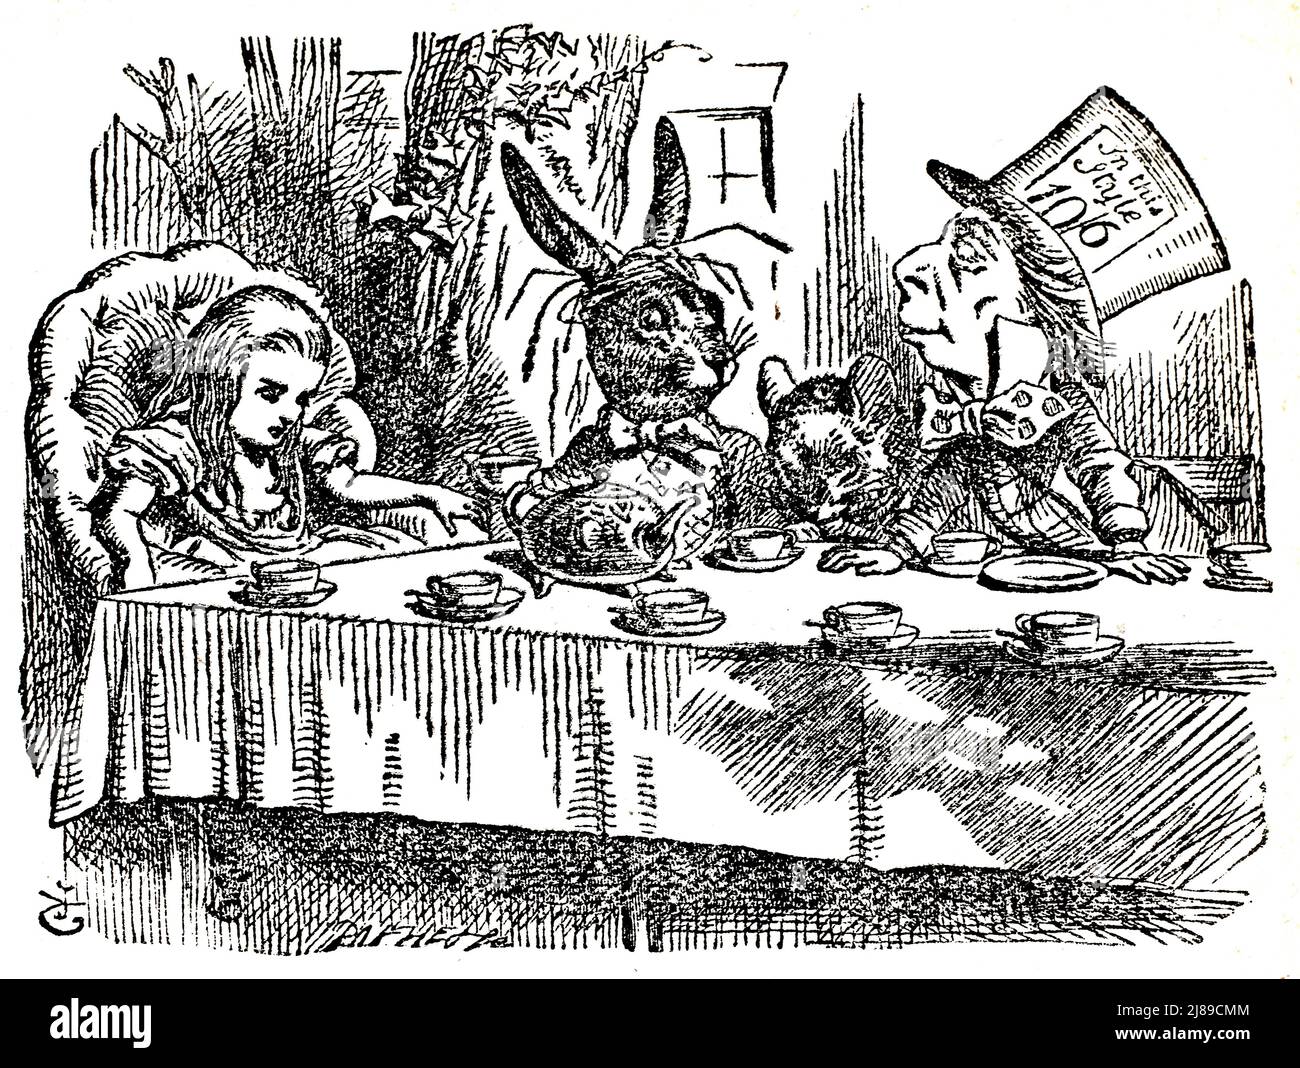 John Tenniel illustration of the Mad Hatter's Tea Party from Alice in Wonderland by Lewis Carroll Stock Photo